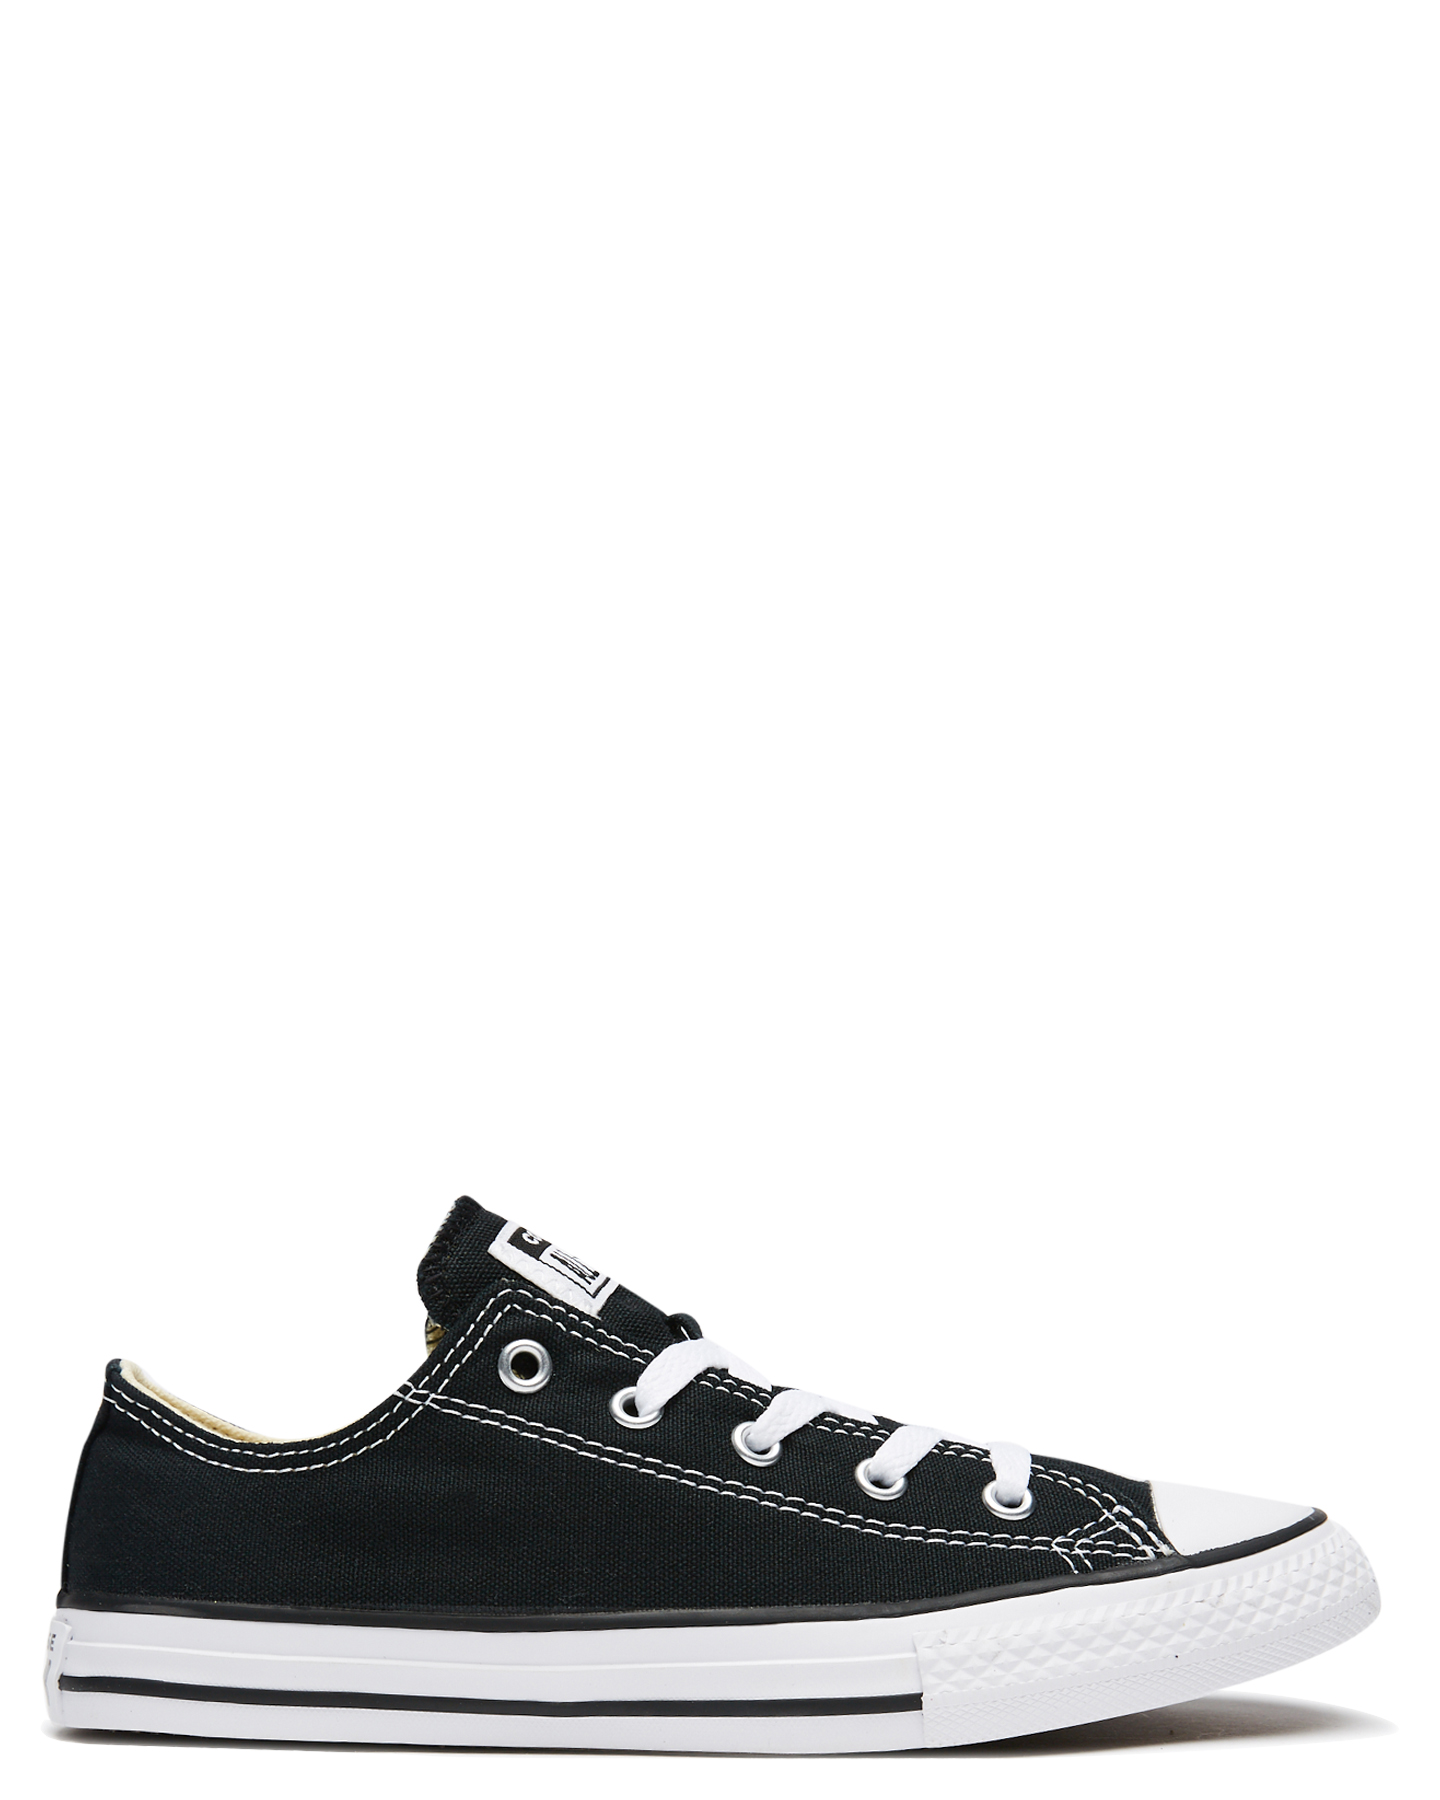 converse outlet return policy